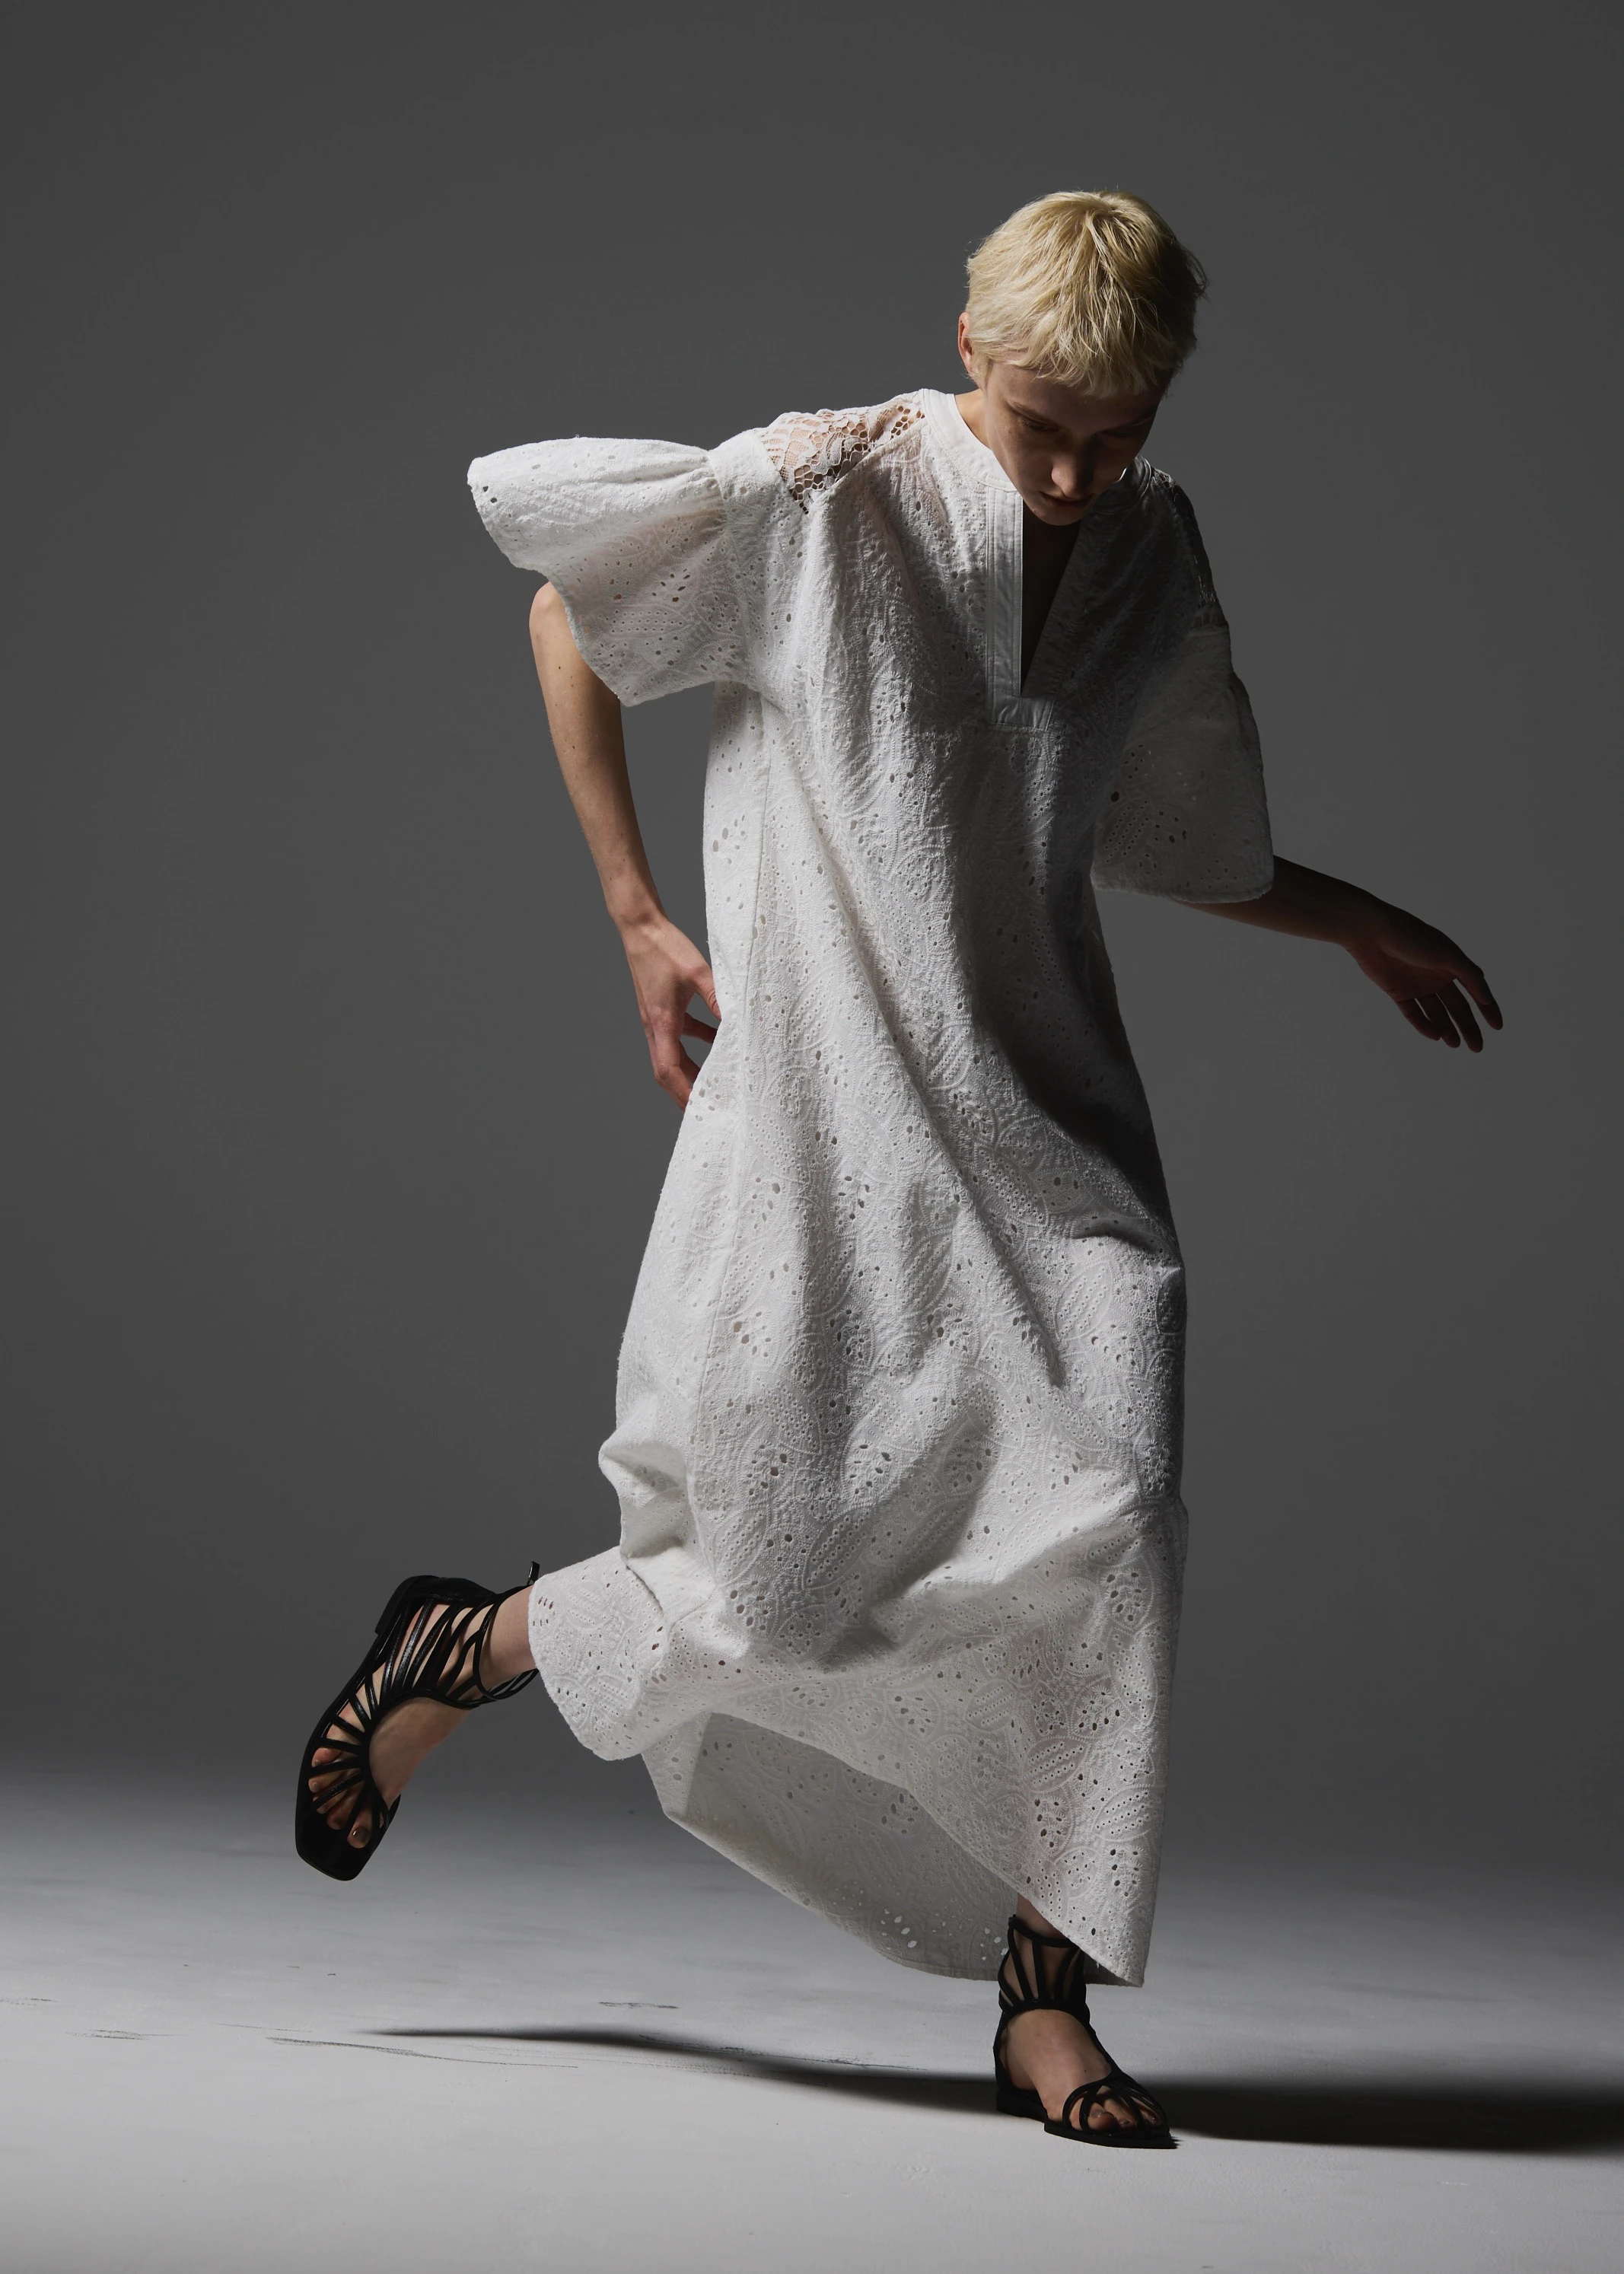 patchwork cotton lace kaftan OP / willfully（ウィルフリー）のonepiece通販 | willfully  ONLINE SHOP